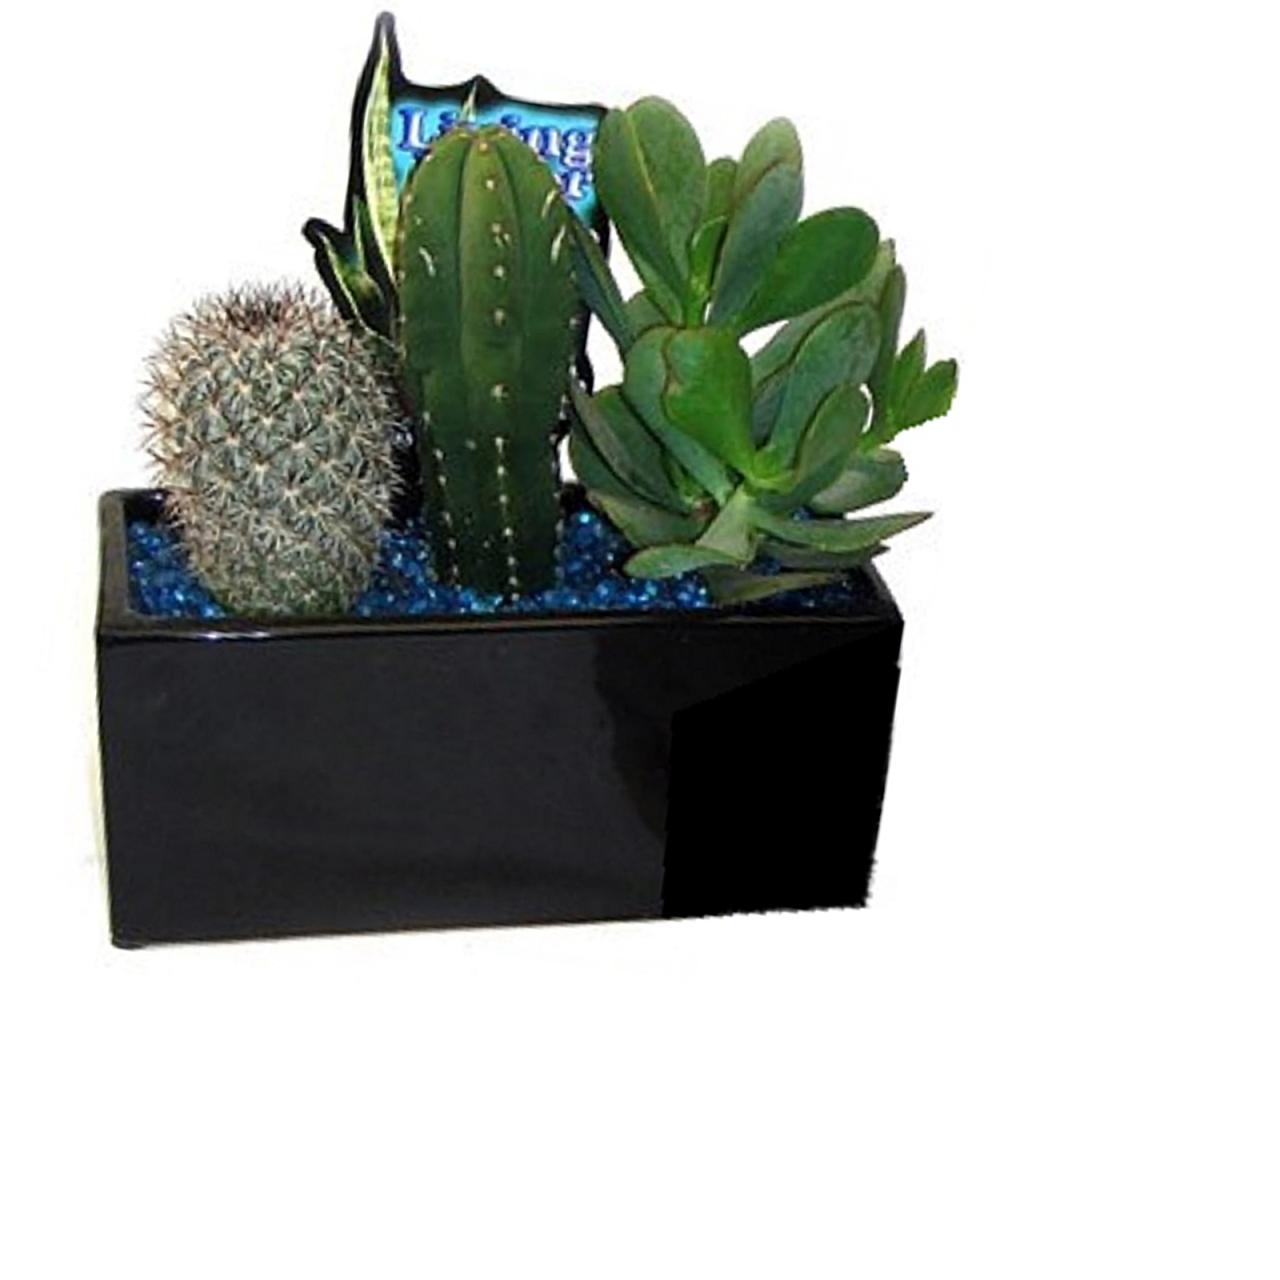 Hanging Plants Indoor | Bunnings Cactus Pots: Essential Guide to Materials, Design, and Care